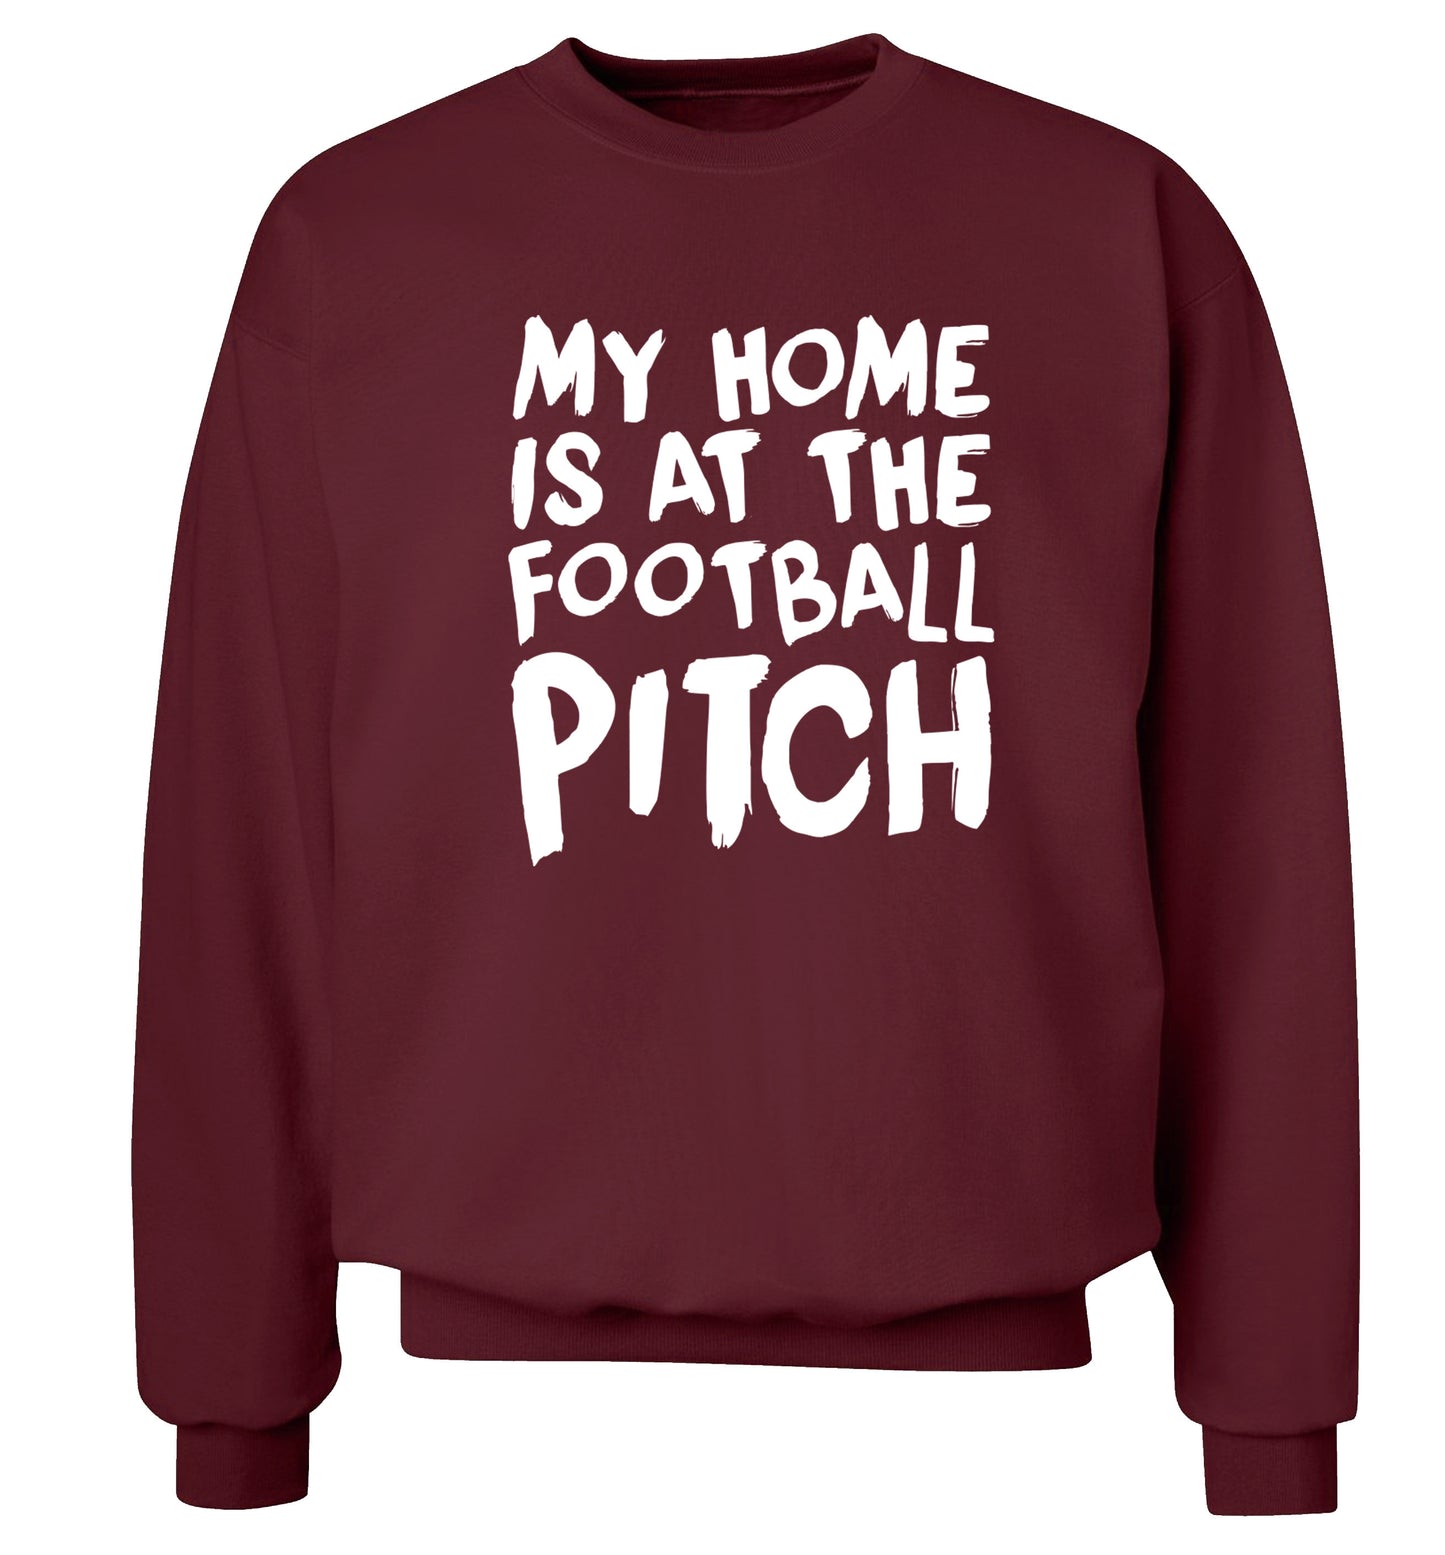 My home is at the football pitch Adult's unisex maroon Sweater 2XL